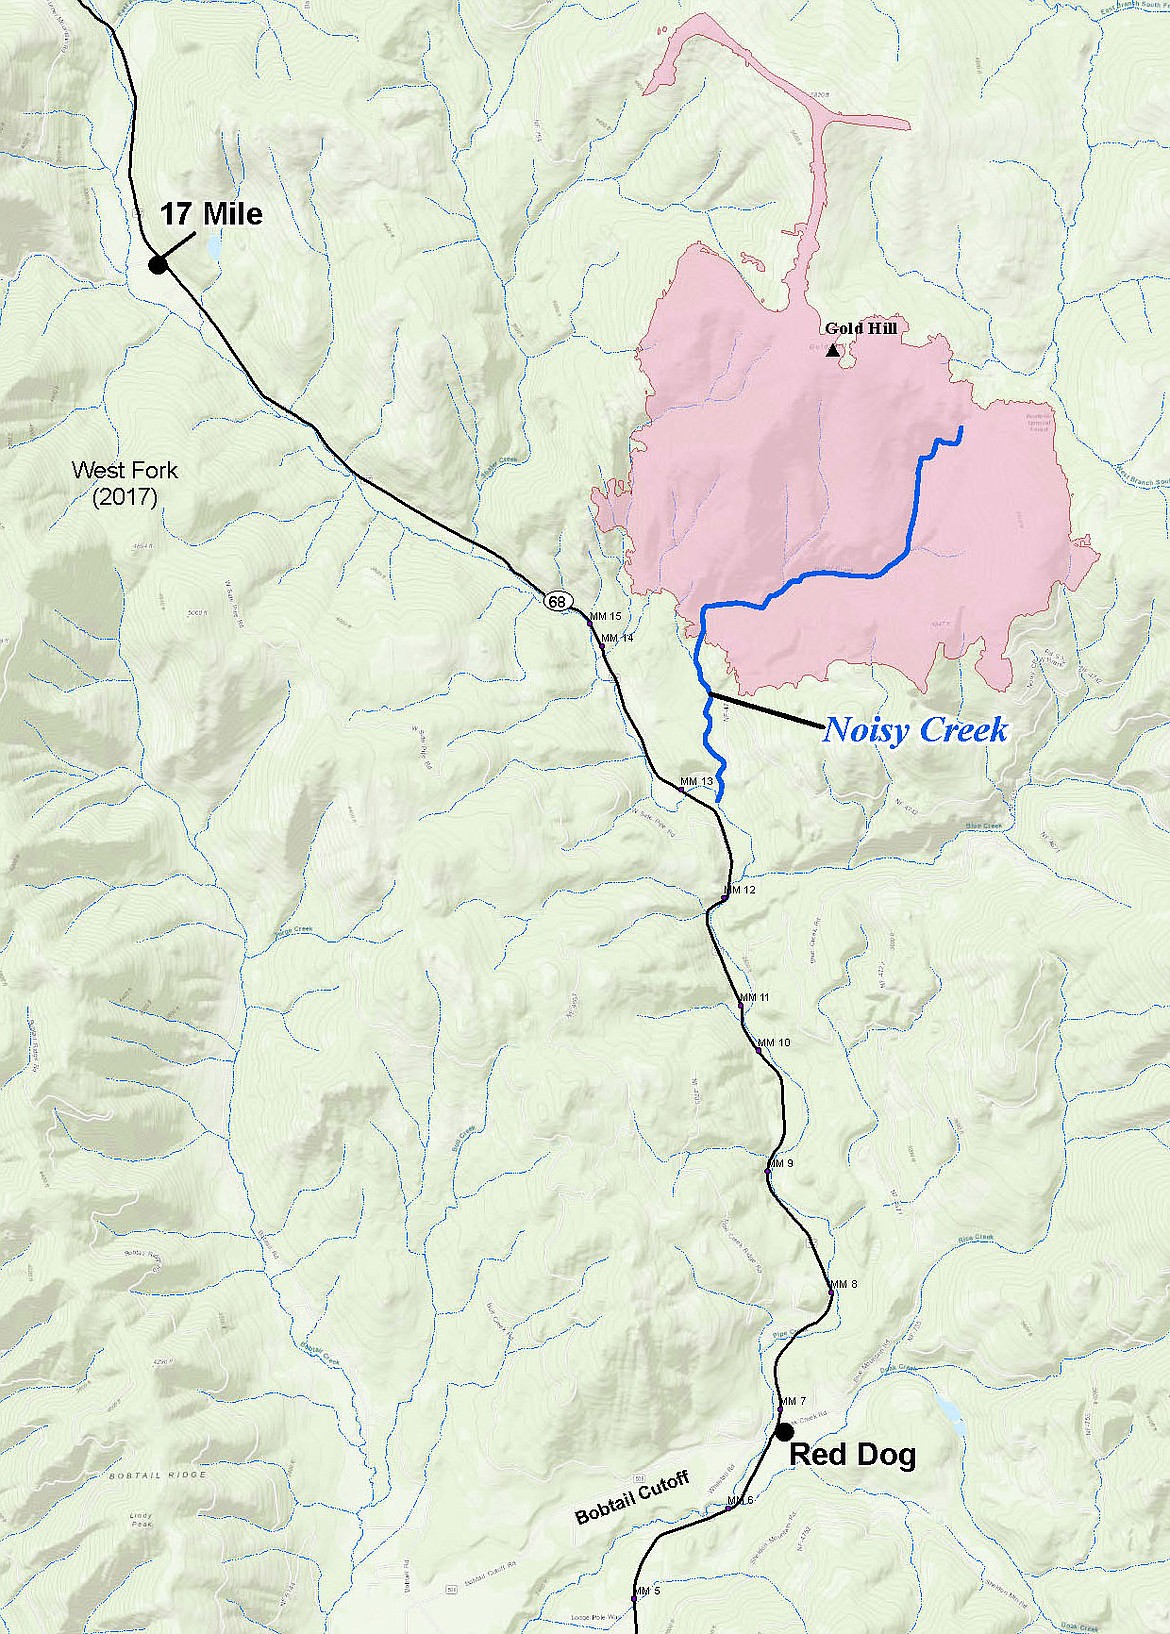 This map of the Gold Hill fire was provided Sunday. (Courtesy Northern Rockies Incident Management Team)